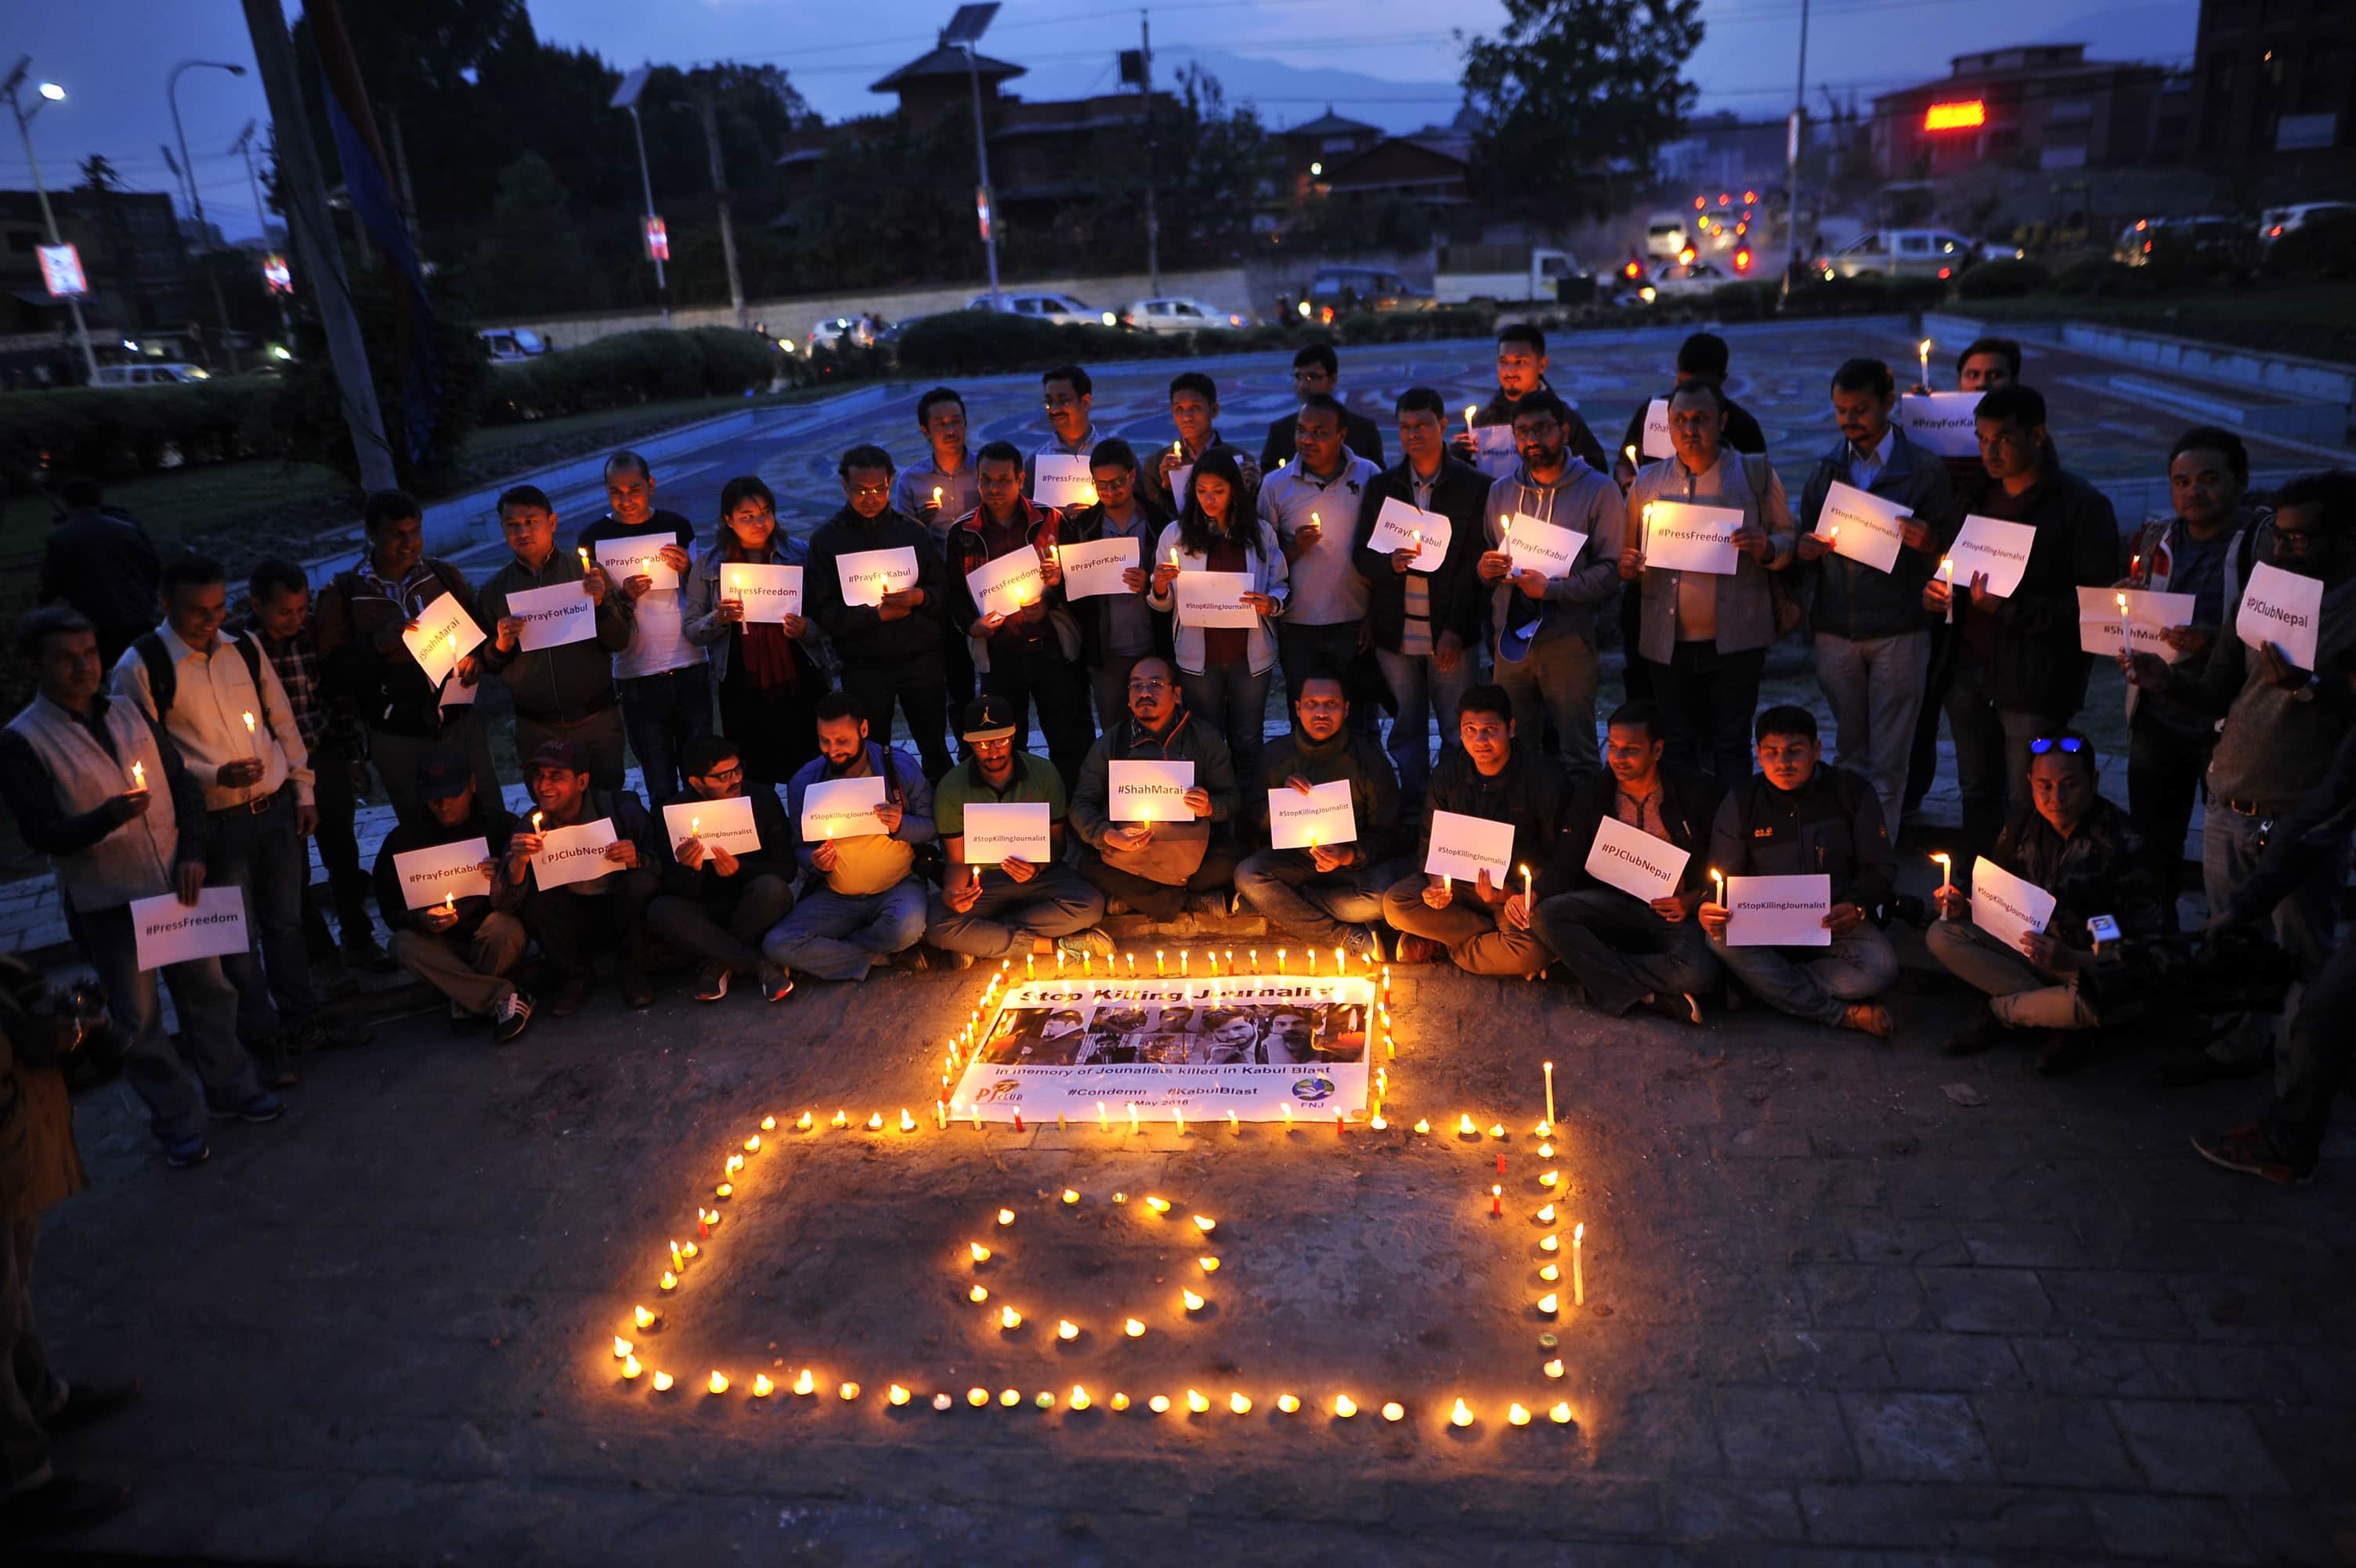 Nepali journalists and photojournalists lit candles to pay tribute to the journalists killed in Kabul attack, May 02, 2018, Narayan Maharjan/NurPhoto via Getty Images